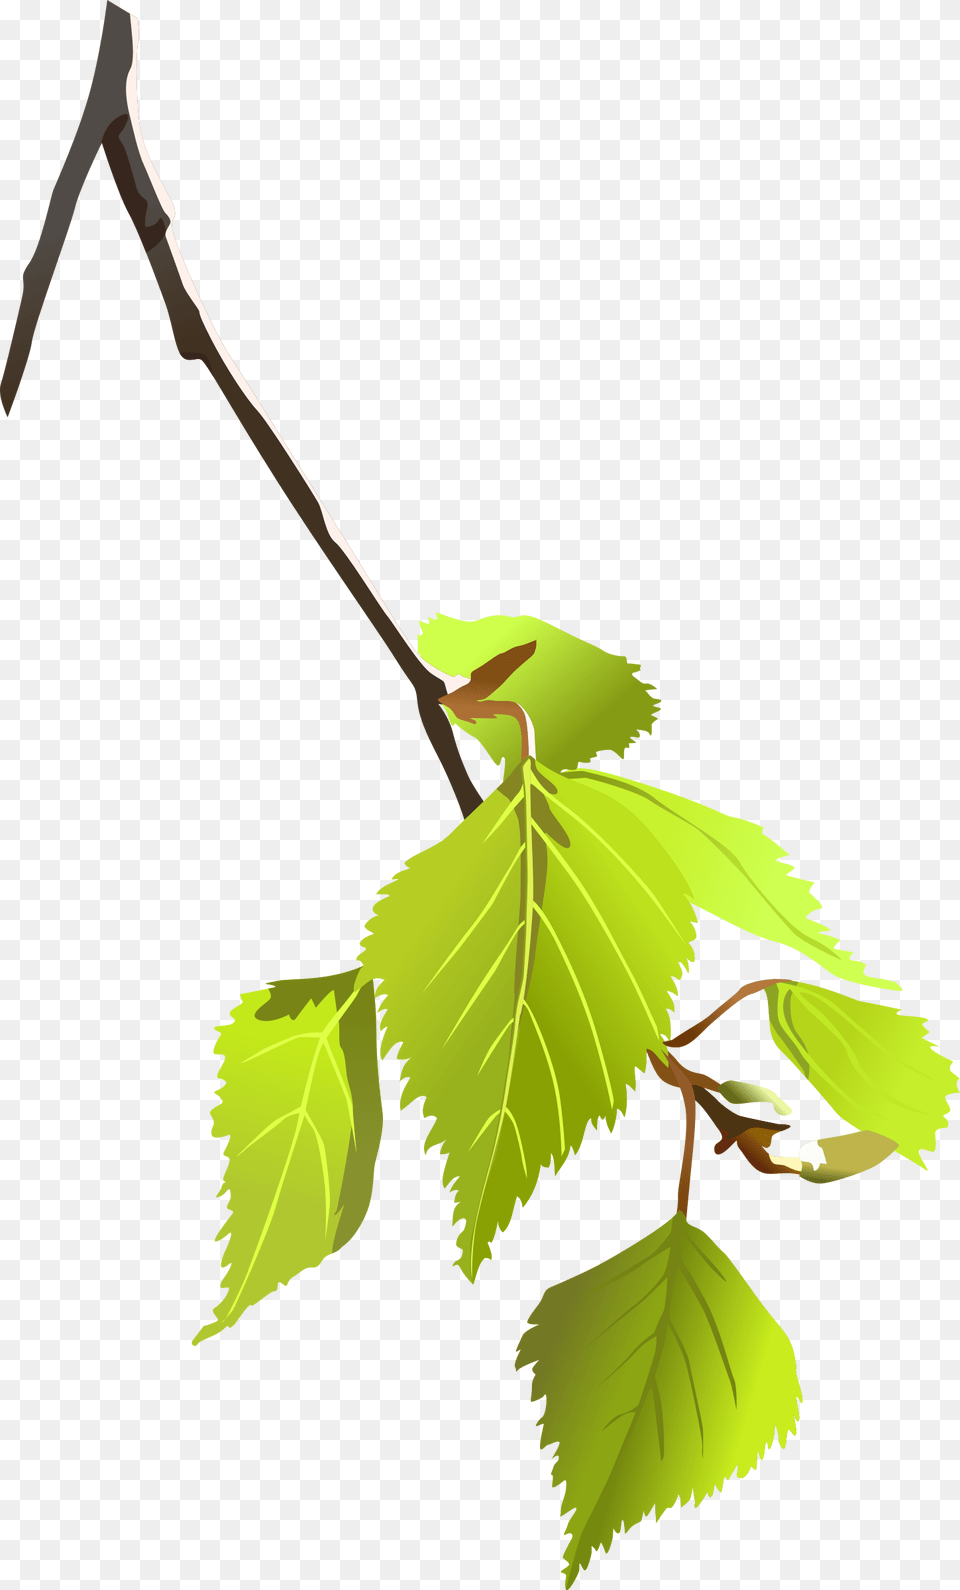 Birch Leafs Small Tree Branch, Leaf, Plant, Herbal, Herbs Png Image